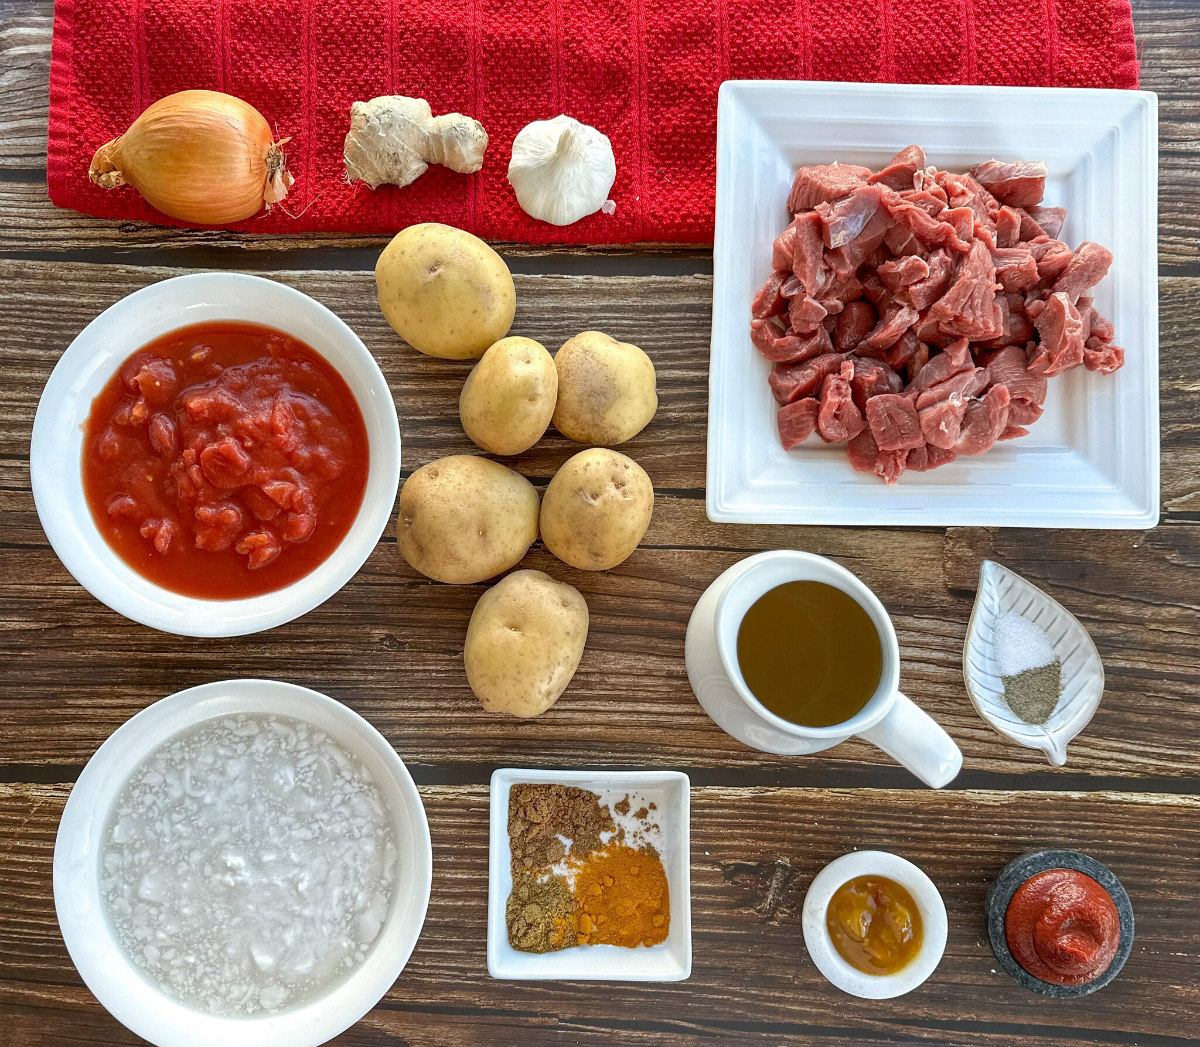 Ingredients for a slow cooker lamb and potato curry - see recipe card for full details